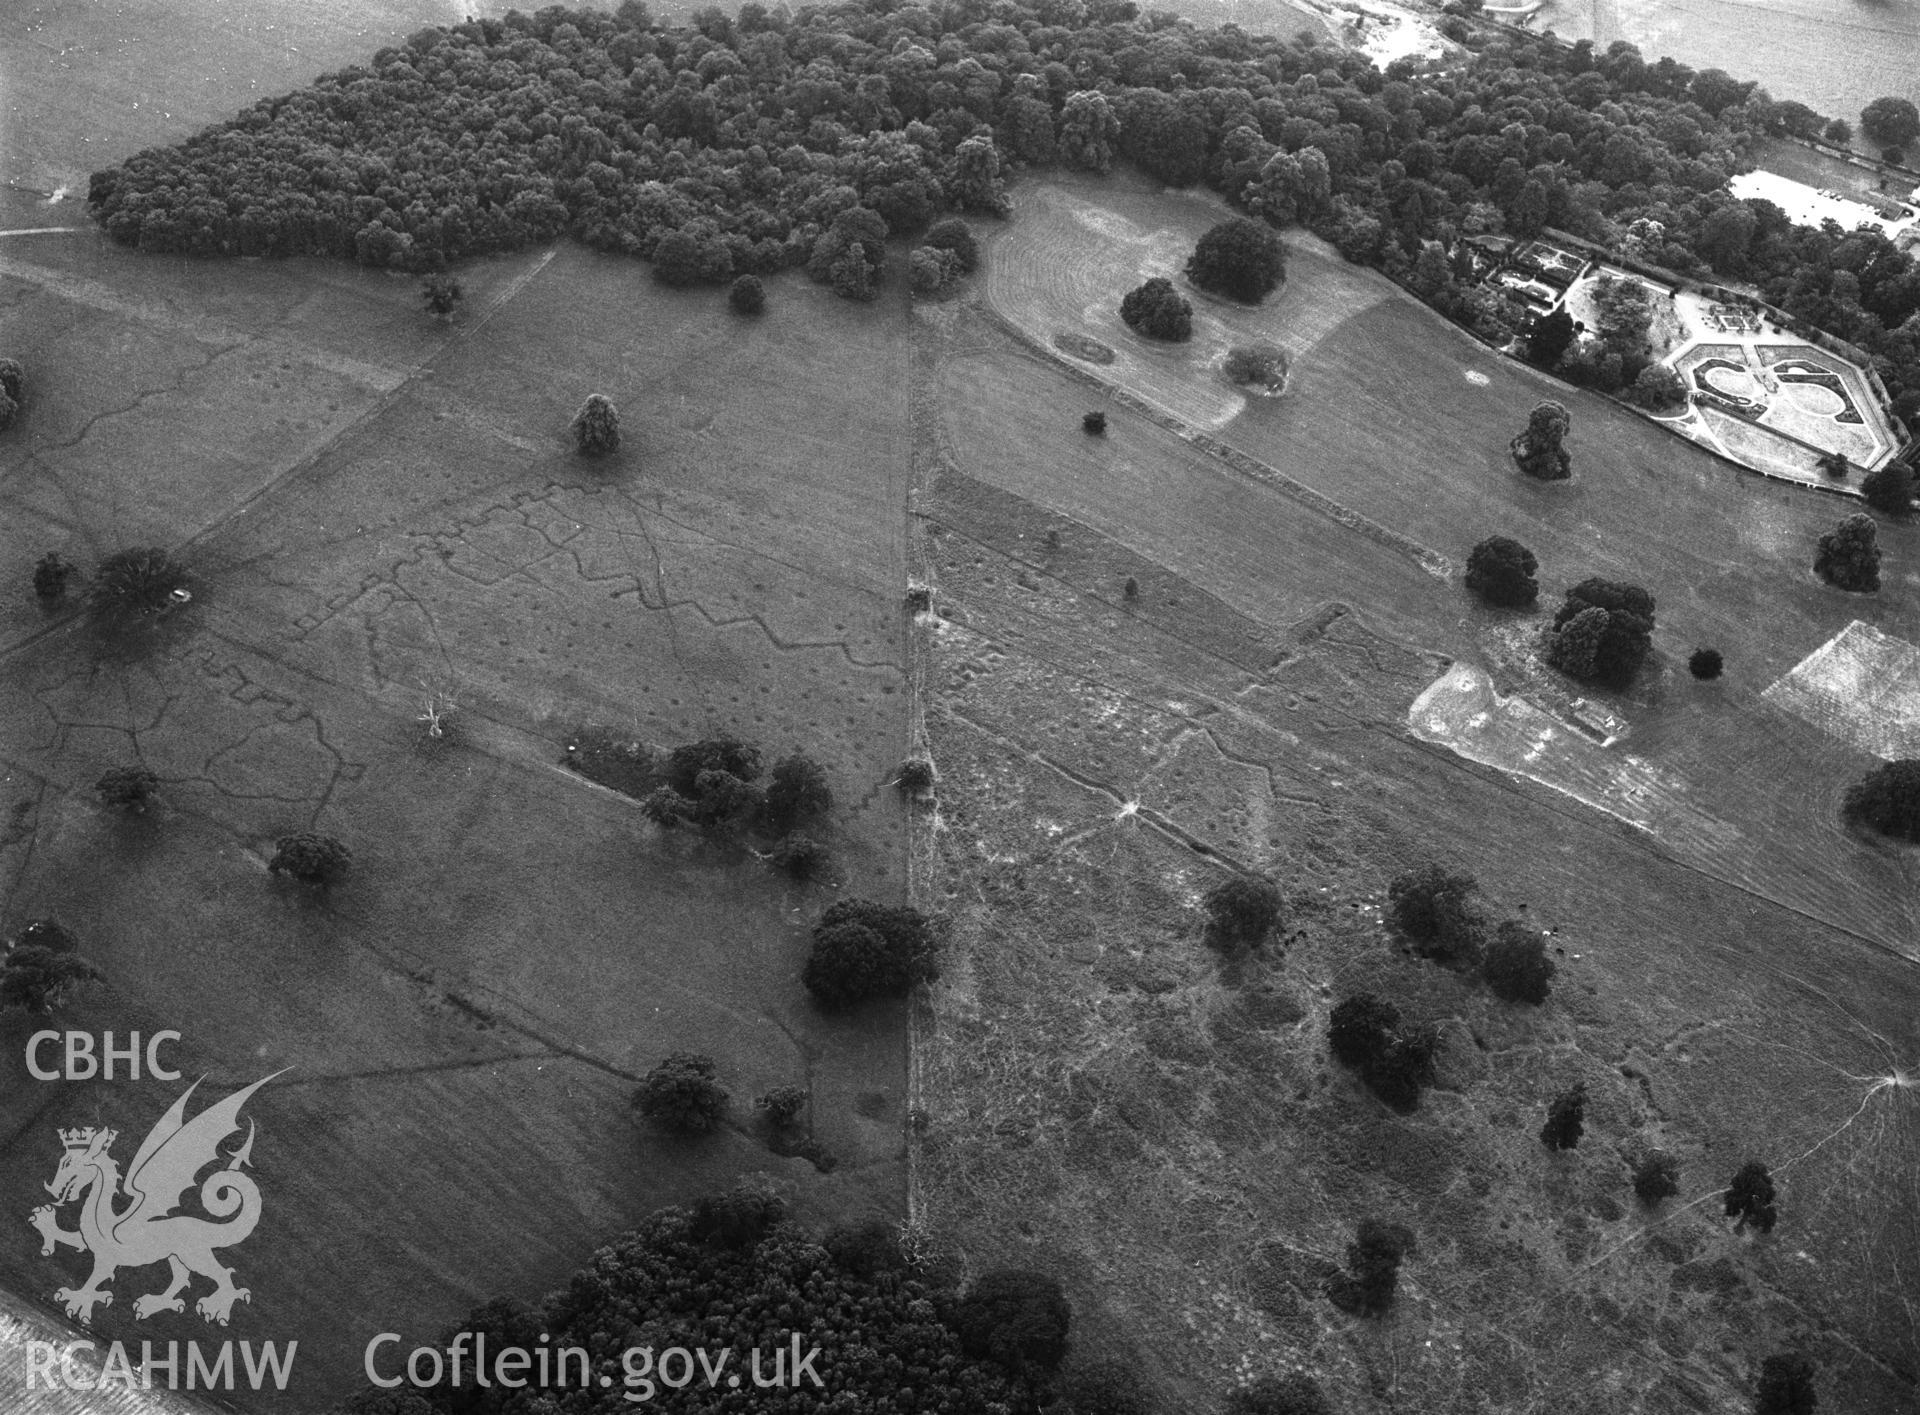 RCAHMW black and white oblique aerial photograph of Bodelwyddan Park Army Practice Trenches, taken by C R Musson, 22/07/1996.